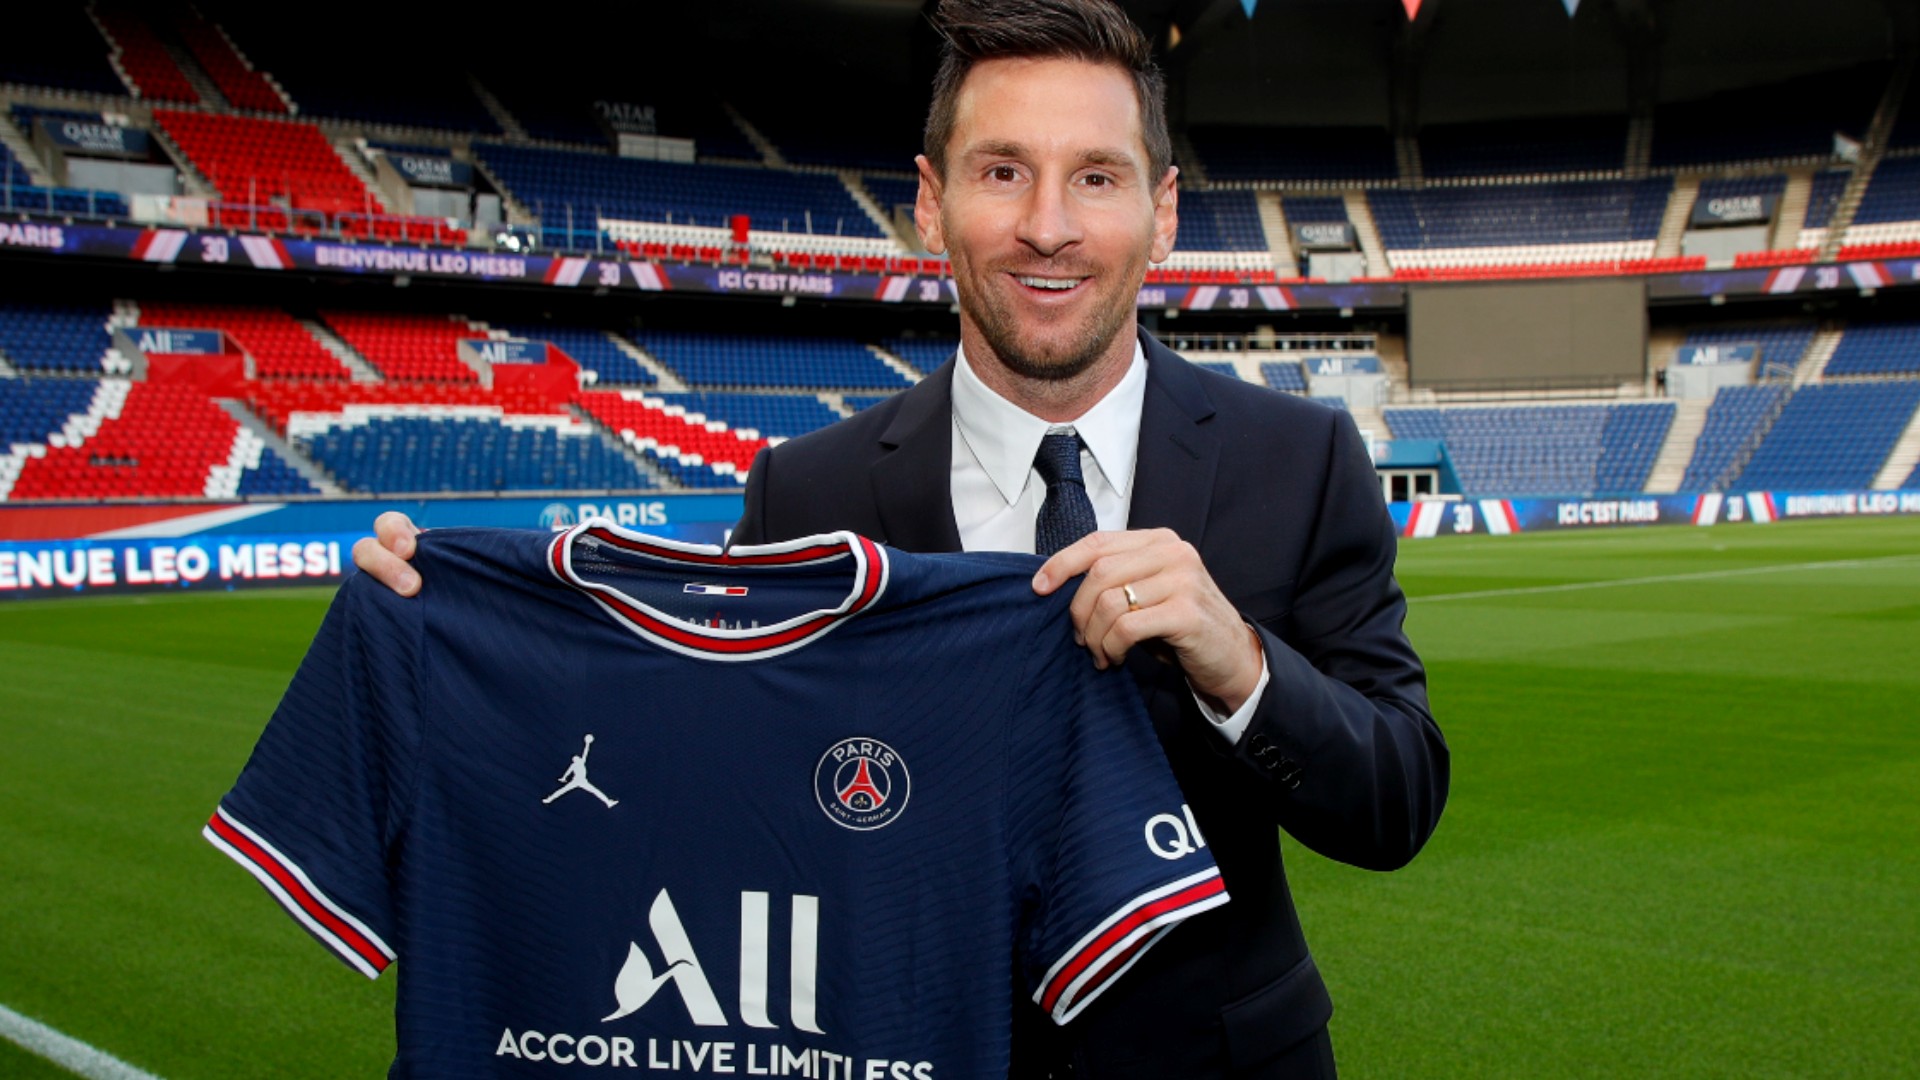 Lionel Messi Officially Completes Move to Paris SaintGermain